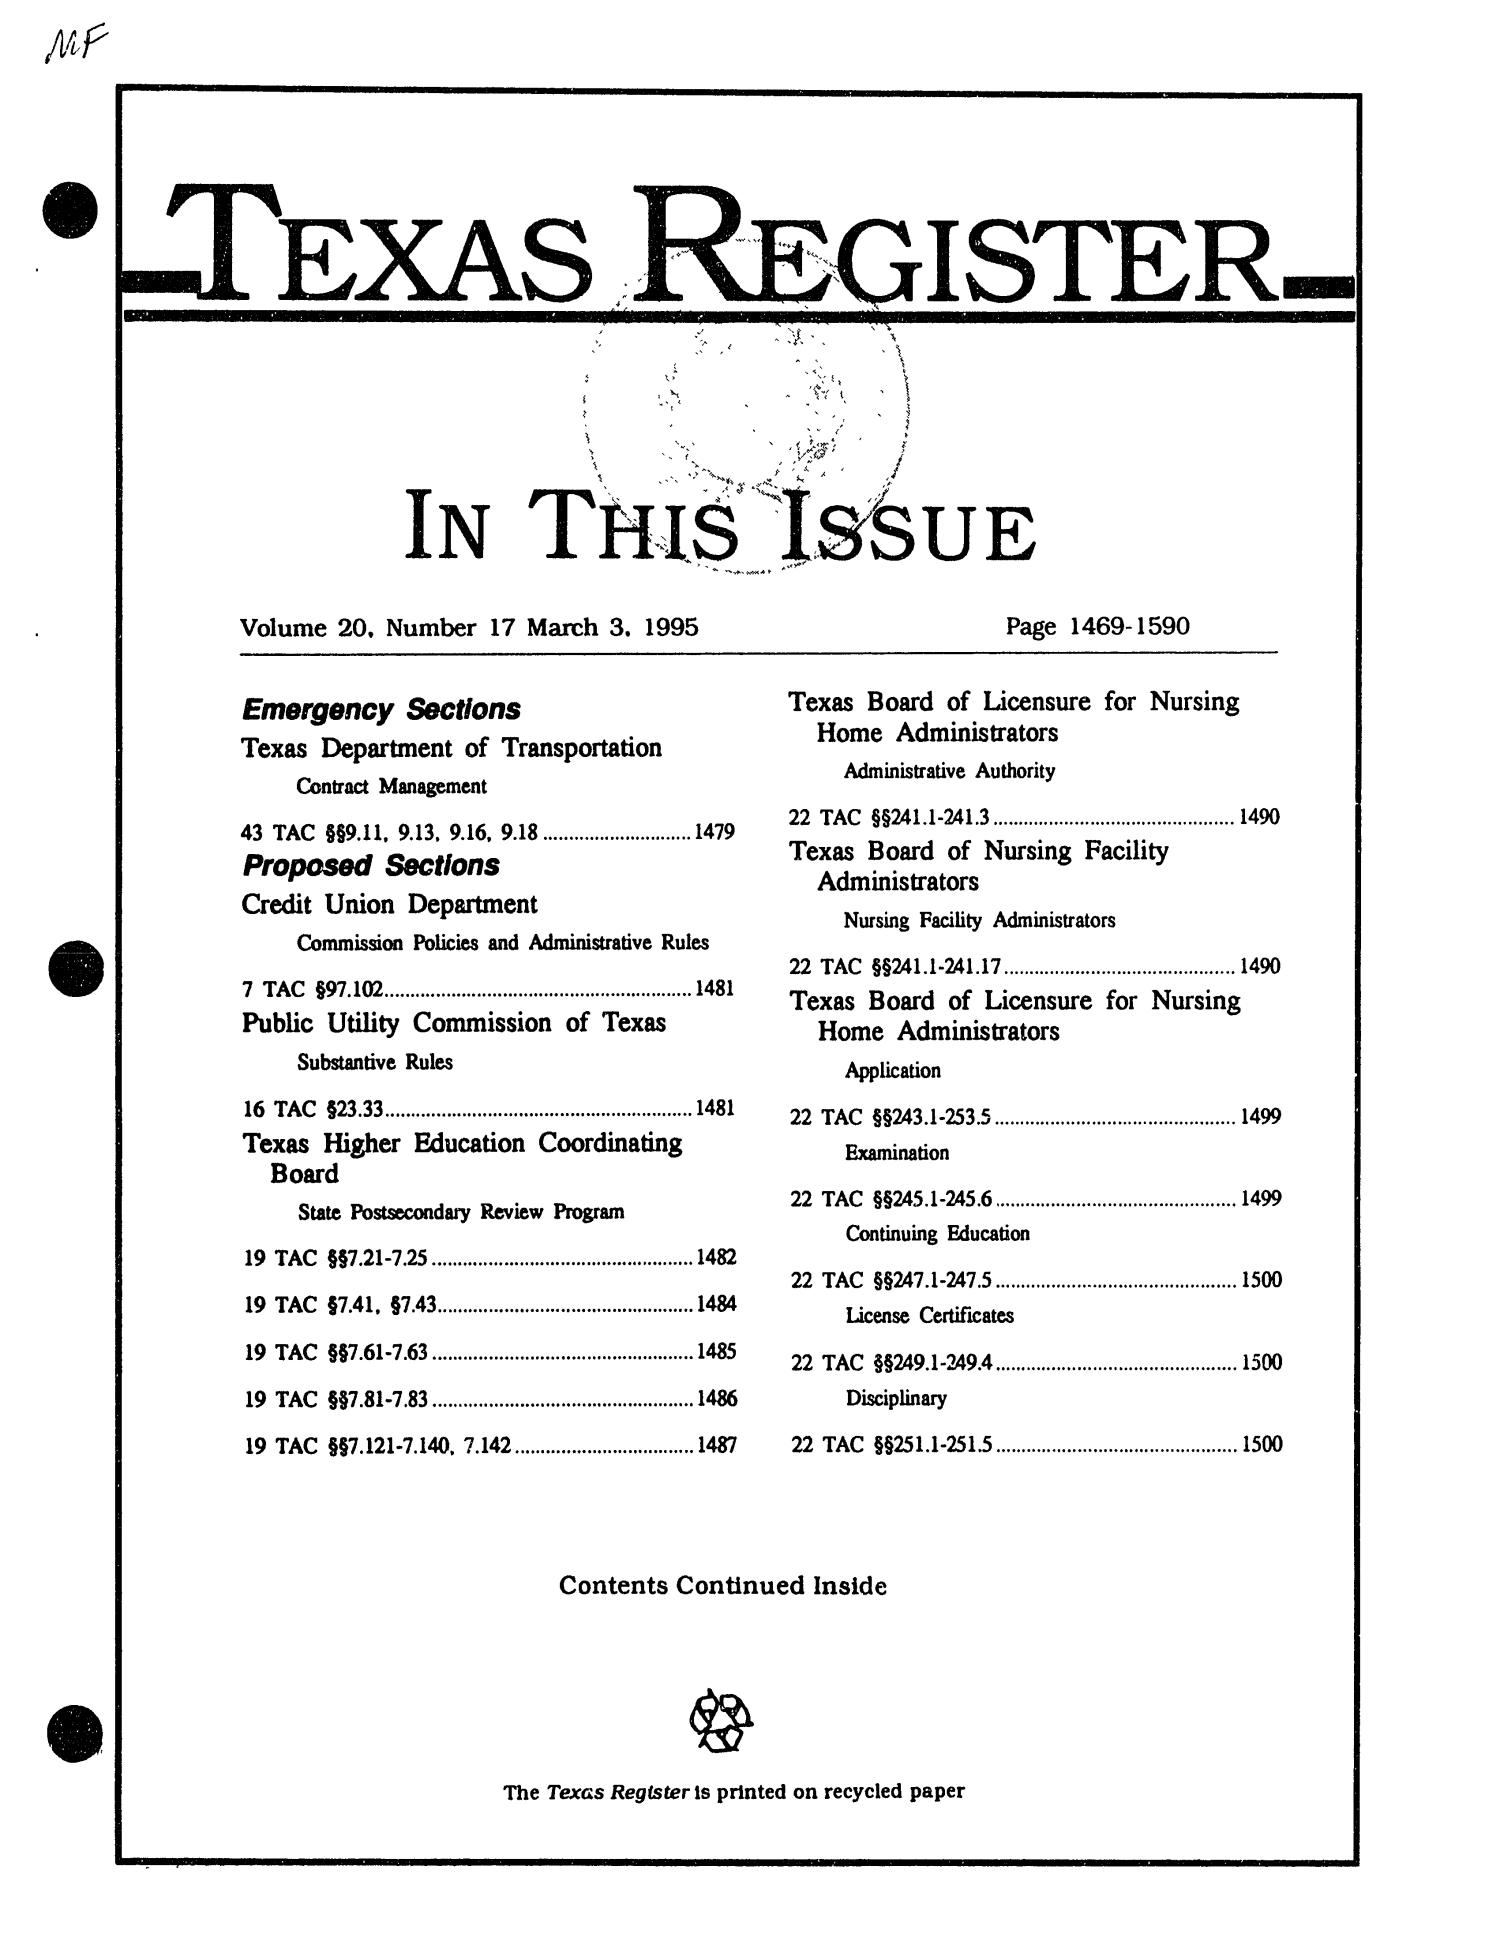 Texas Register, Volume 20, Number 17, Pages 1469-1590, March 3, 1995
                                                
                                                    Title Page
                                                